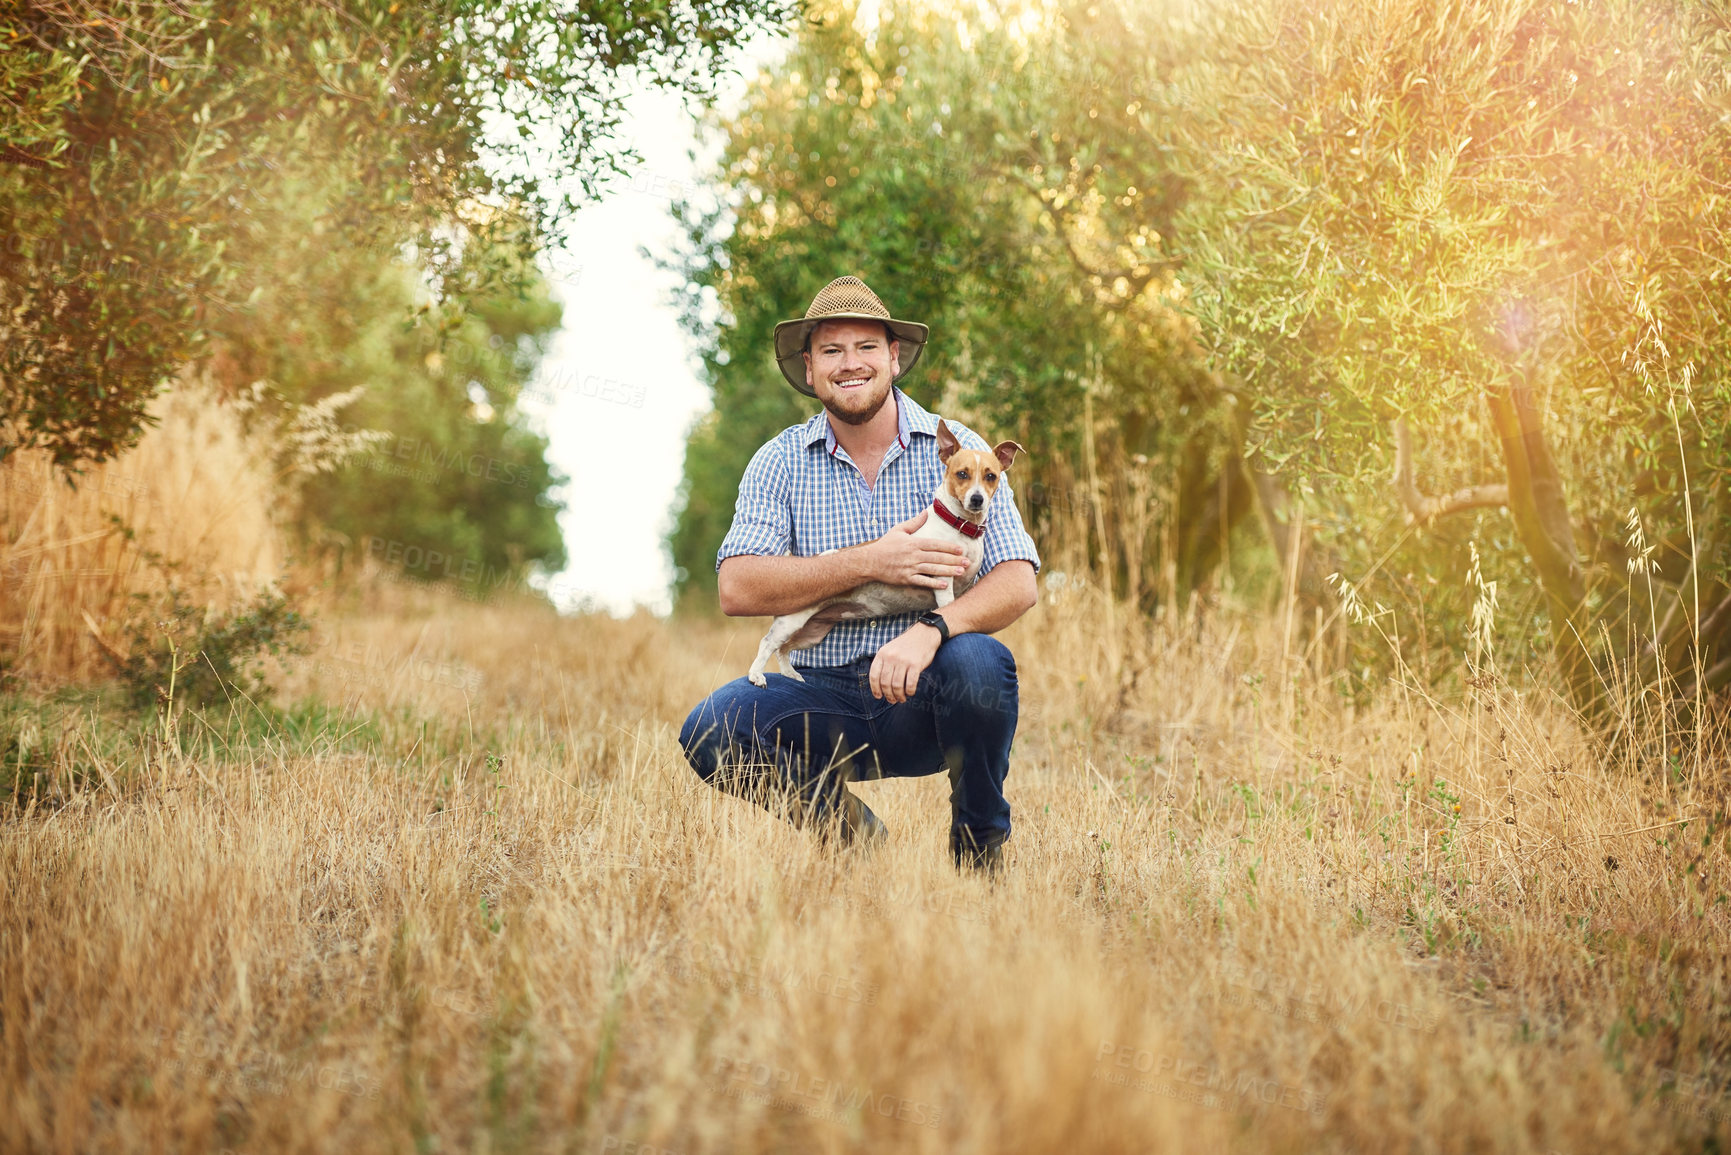 Buy stock photo Shot of a happy farmer holding his dog